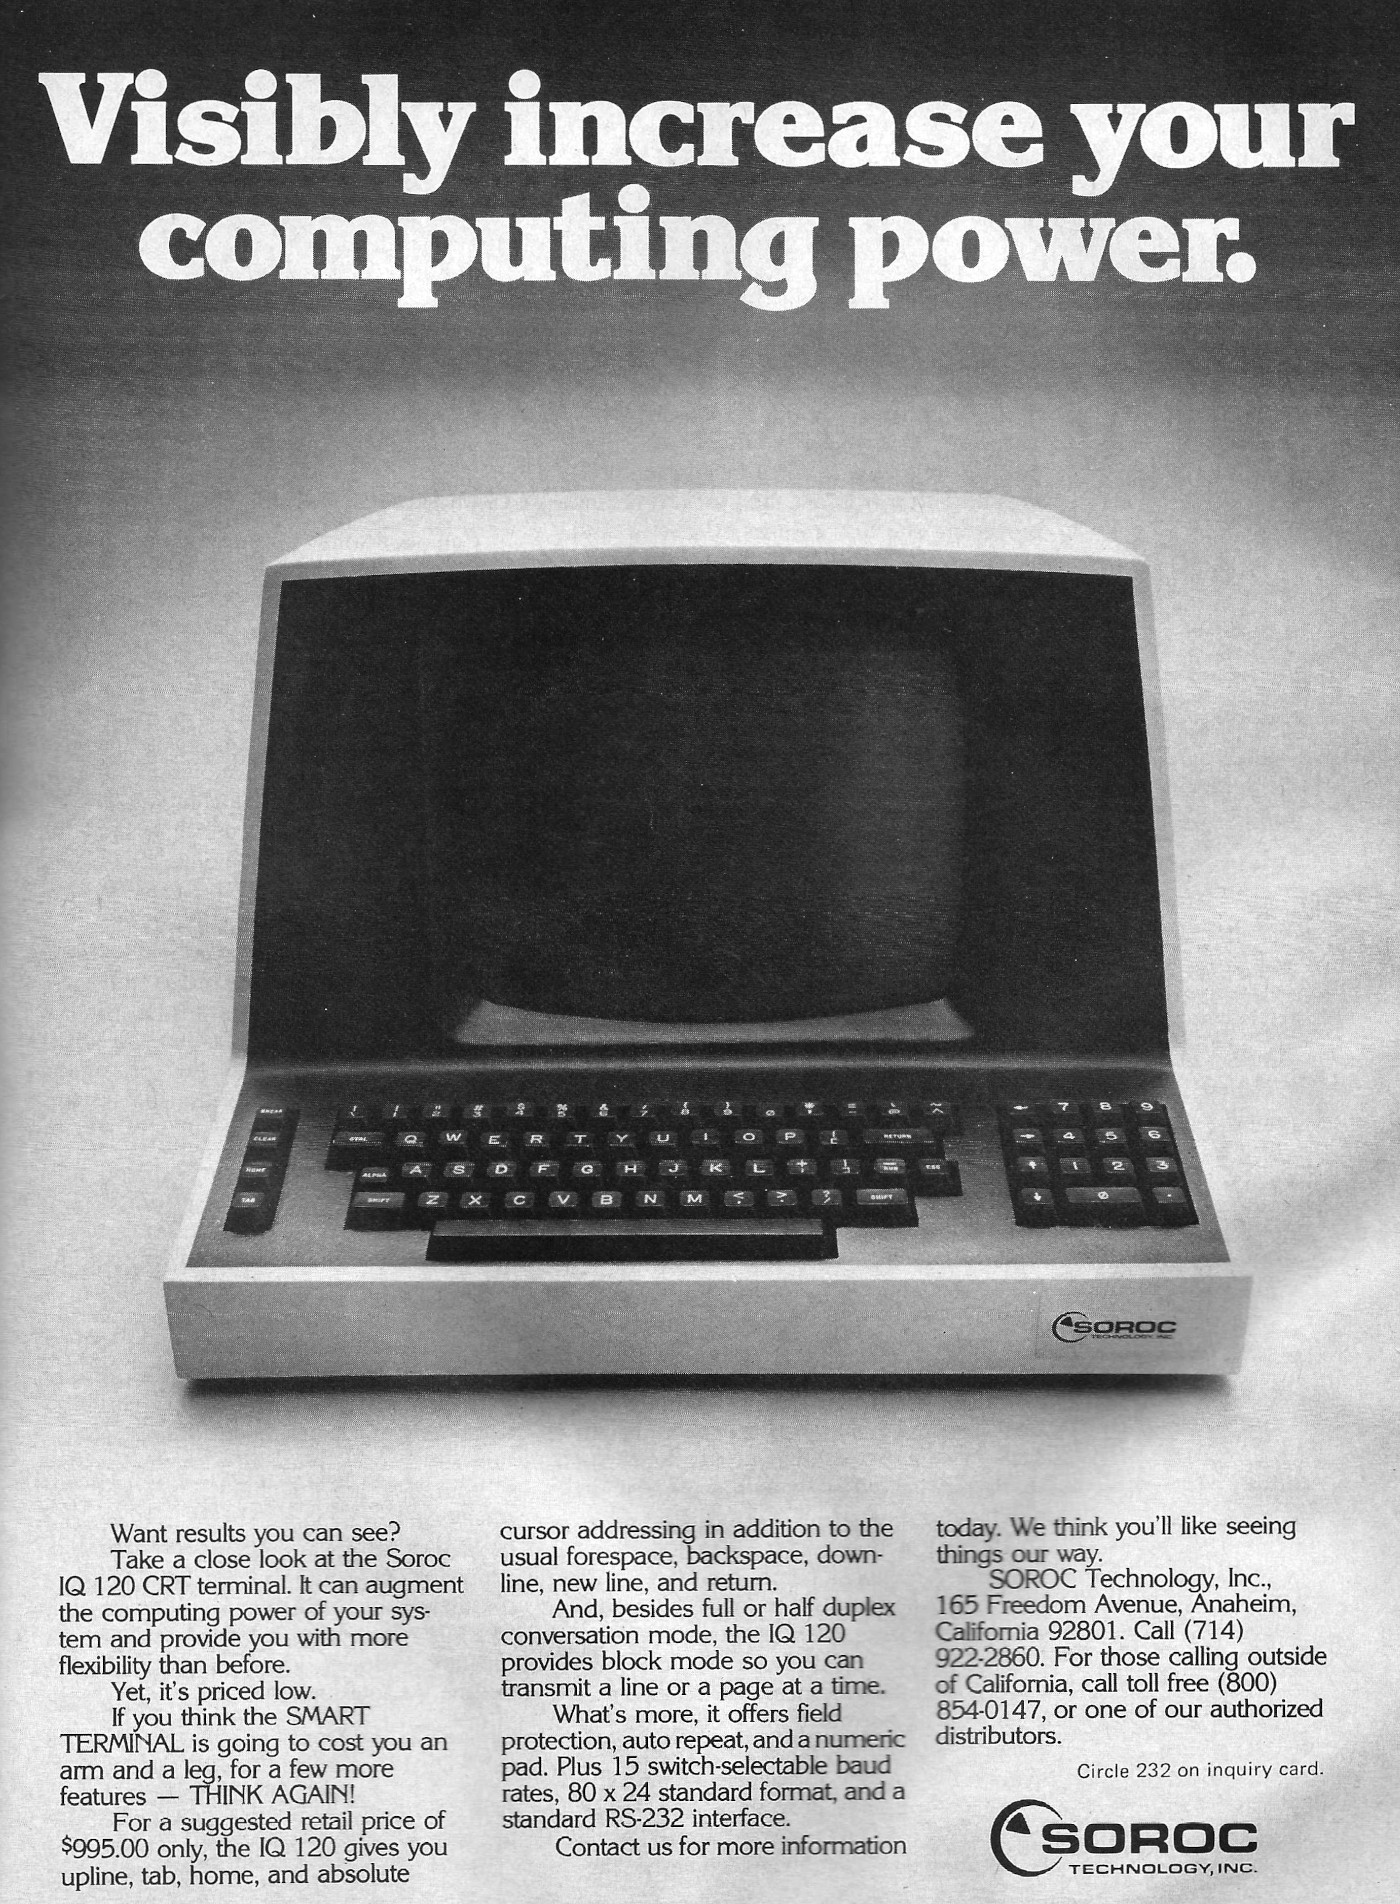 Another advert for the IQ120, from the year before. From Byte, September 1977